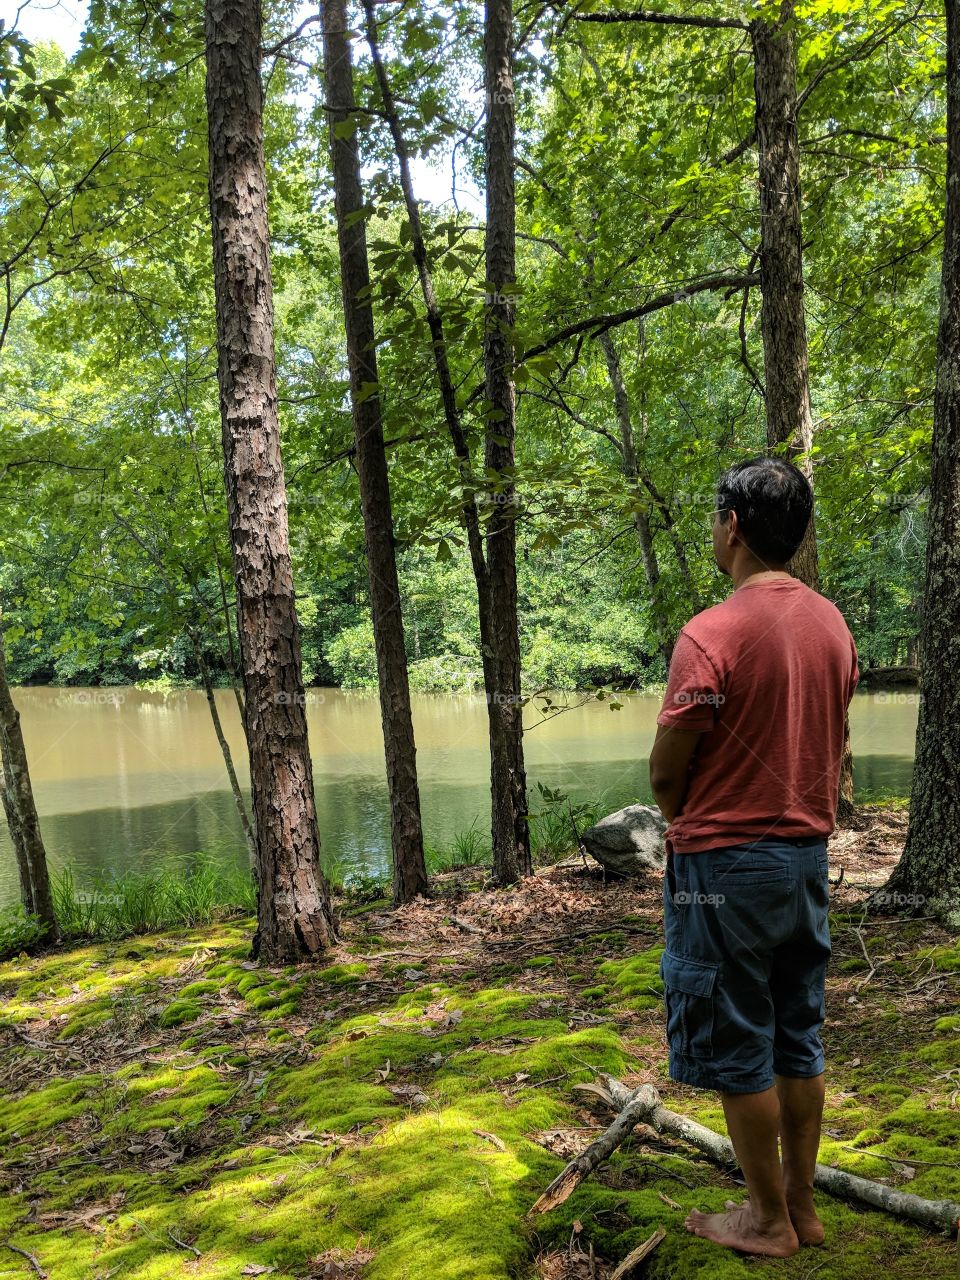 a person stands peacefully meditating on a pond in a mossy forest.